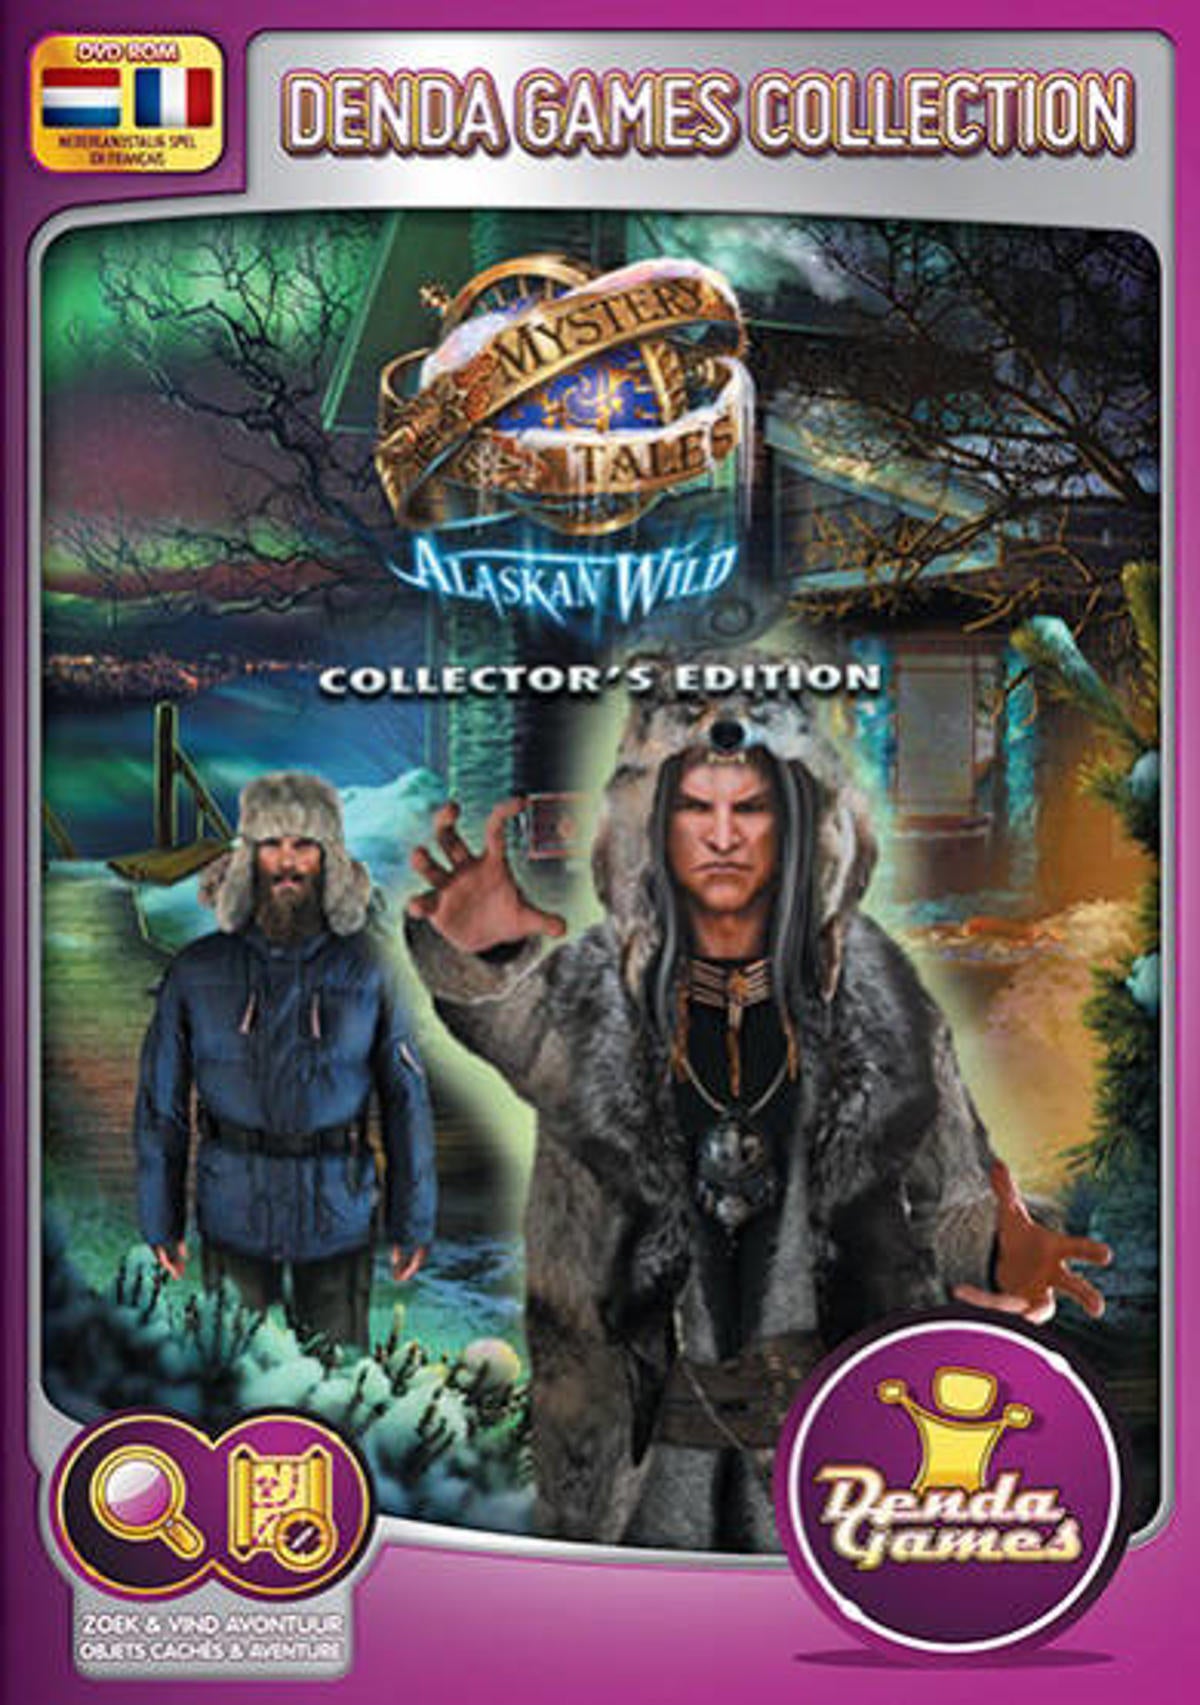 Mystery Tales - Alaskan Wild Collector's Edition